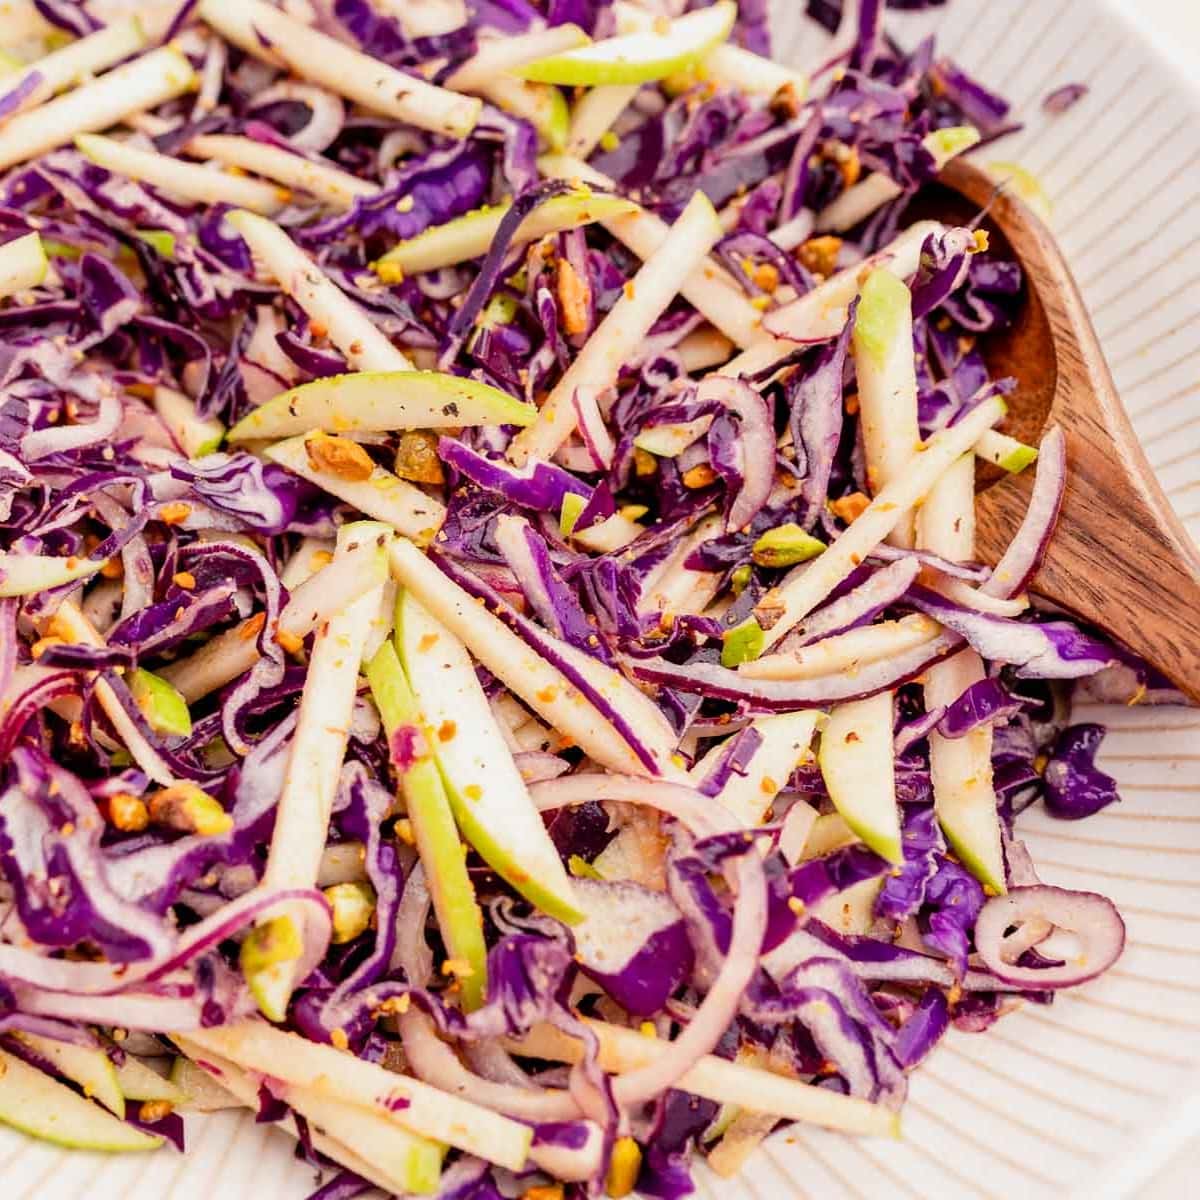 Red cabbage apple slaw with walnuts.